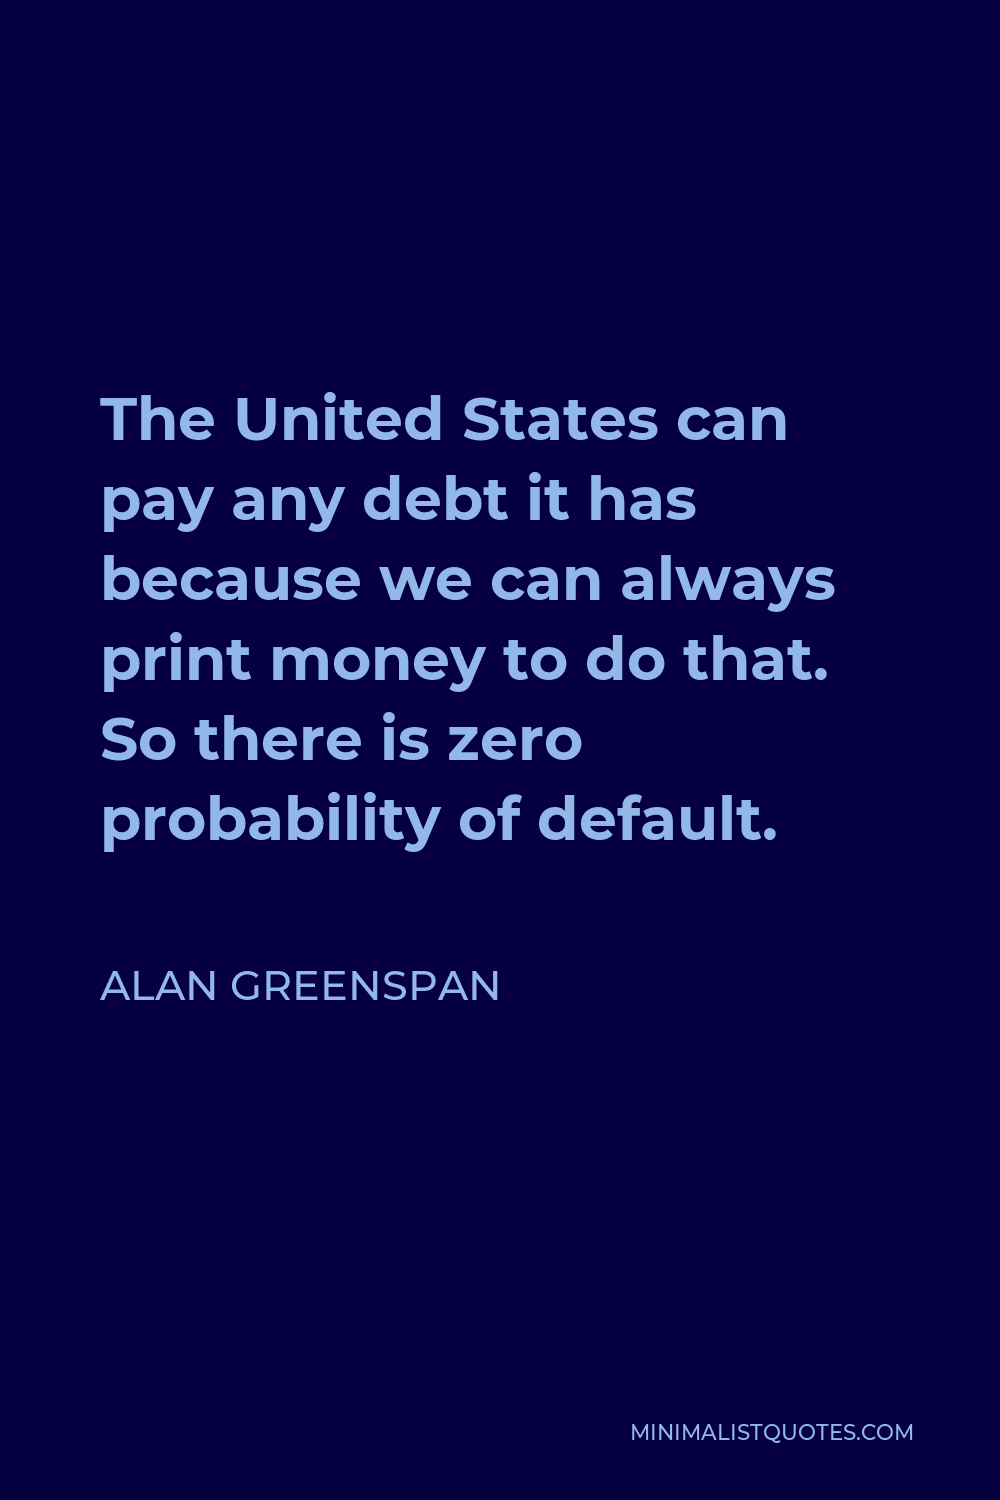 Alan Greenspan Quote - The United States can pay any debt it has because we can always print money to do that. So there is zero probability of default.